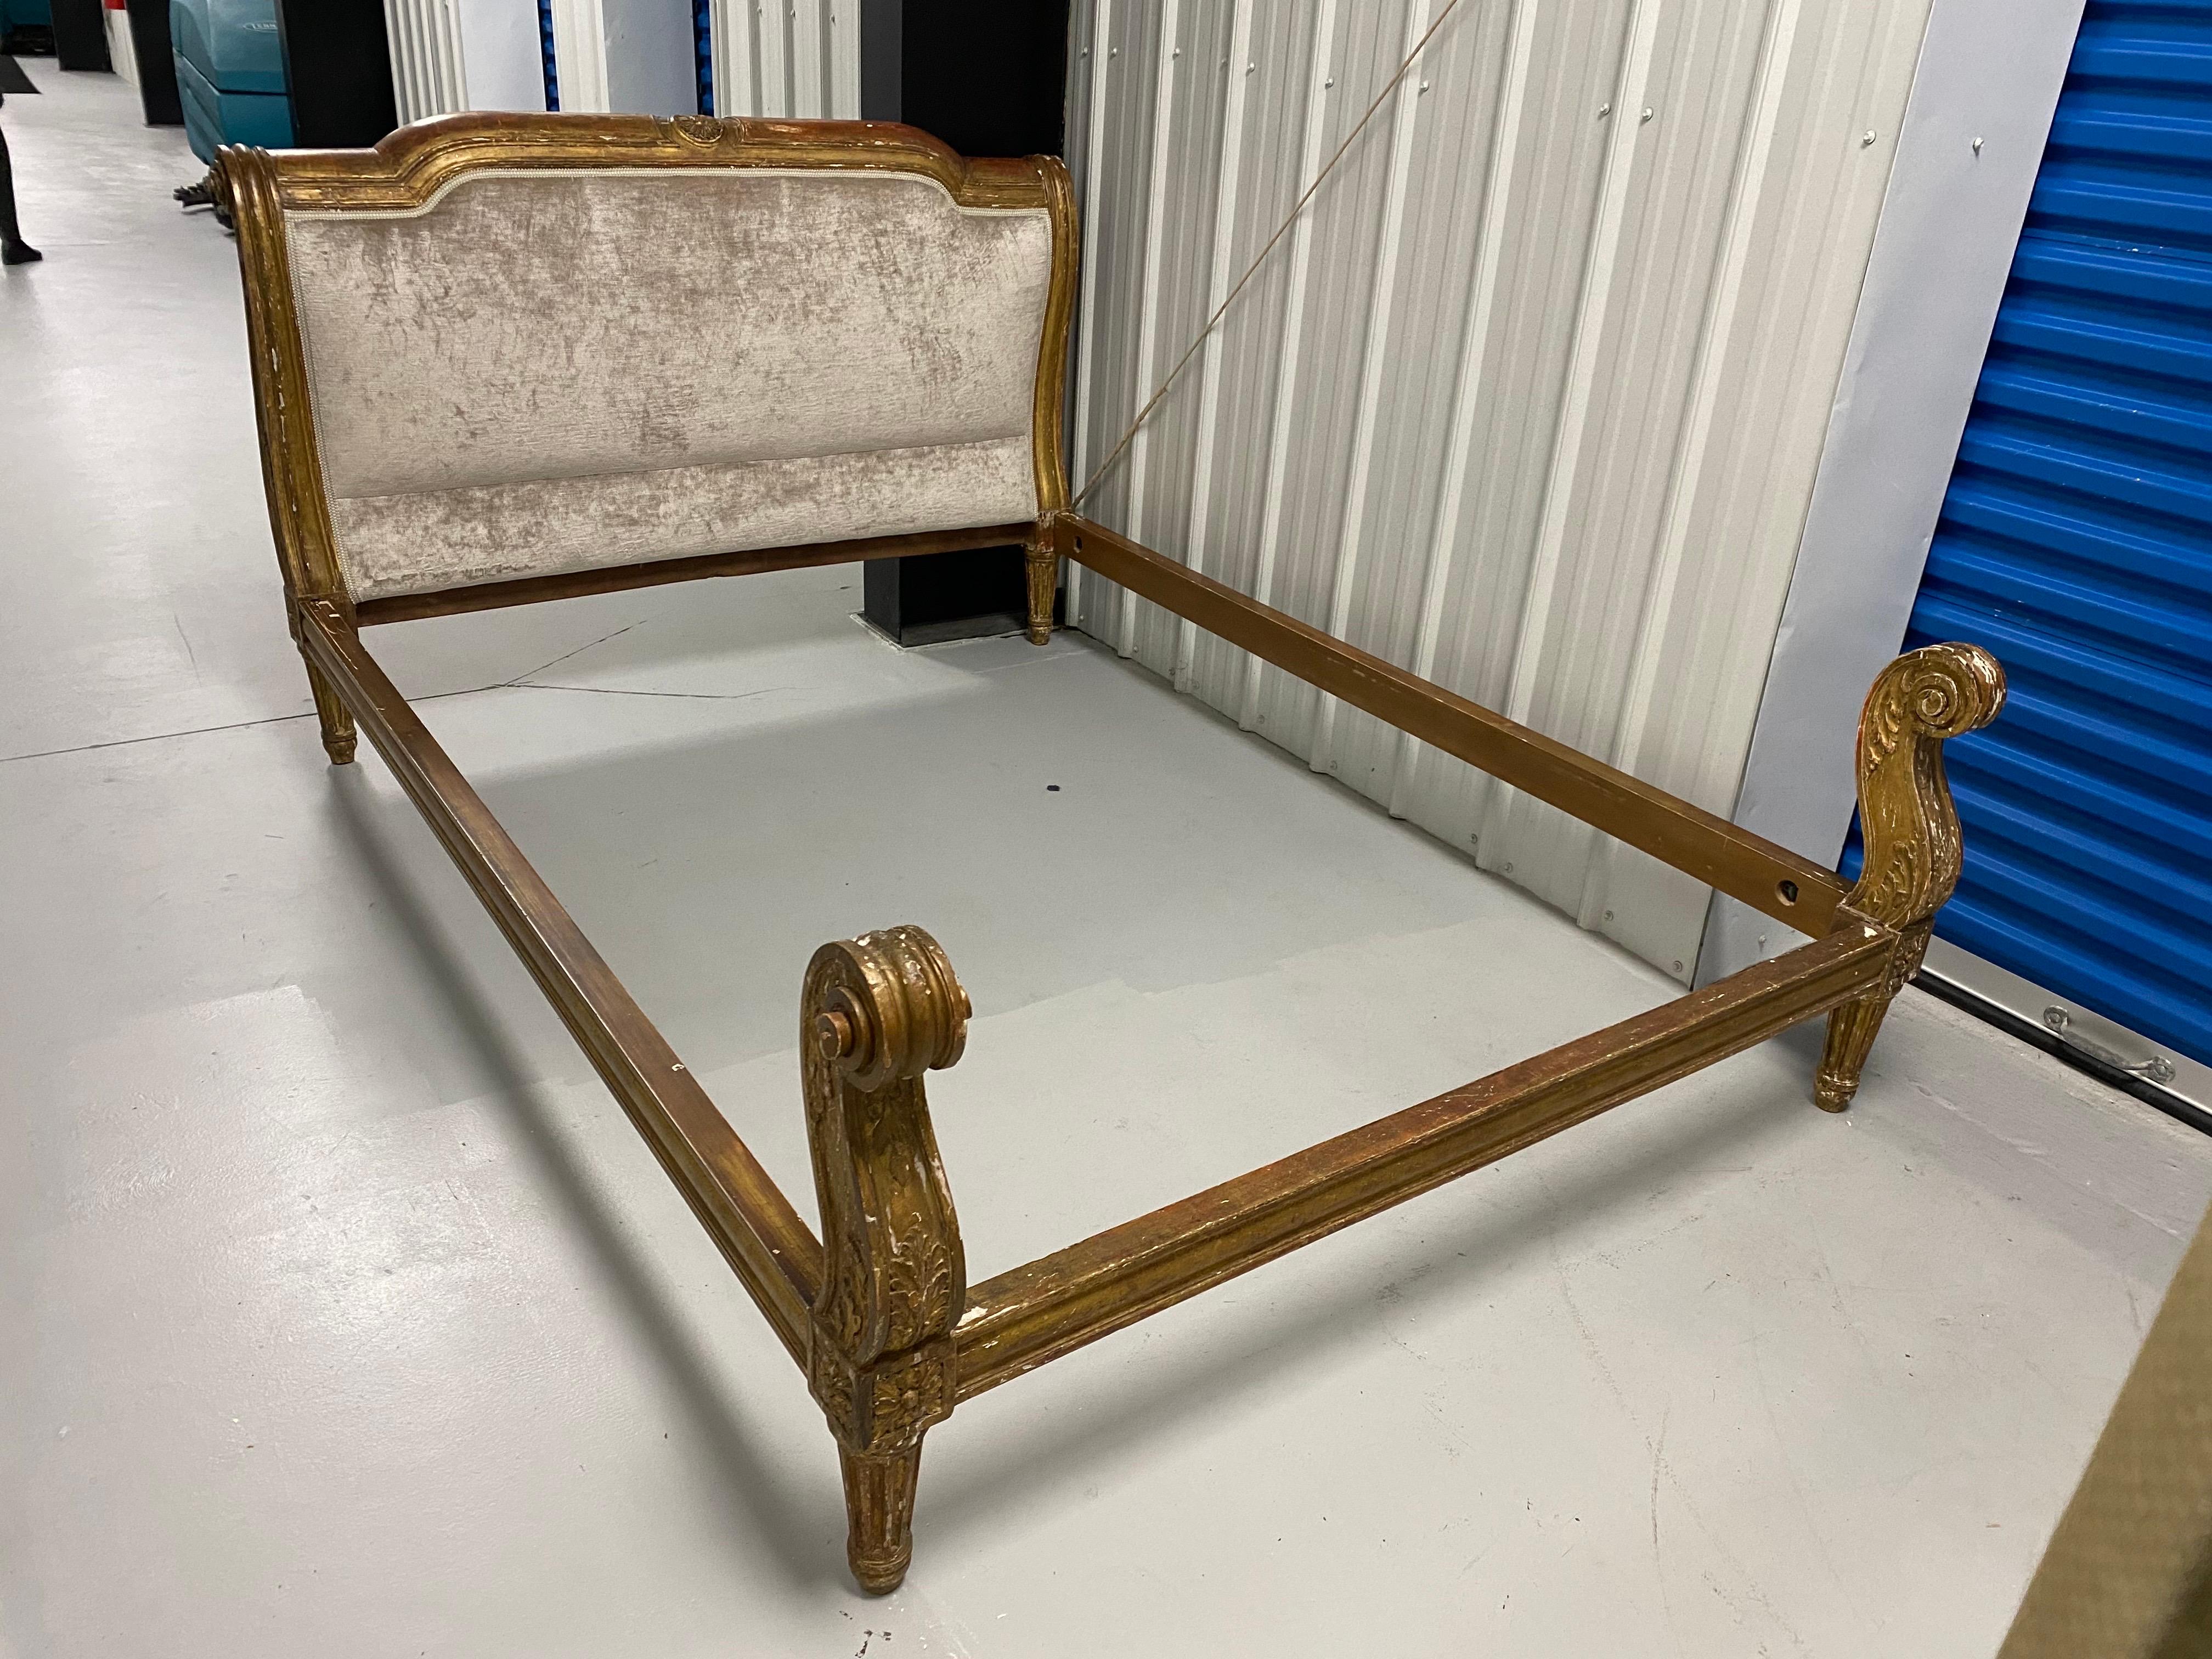 19th C. French Gilt-Wood Customized Queen Sleigh Bed with Mattress, David Easton For Sale 4